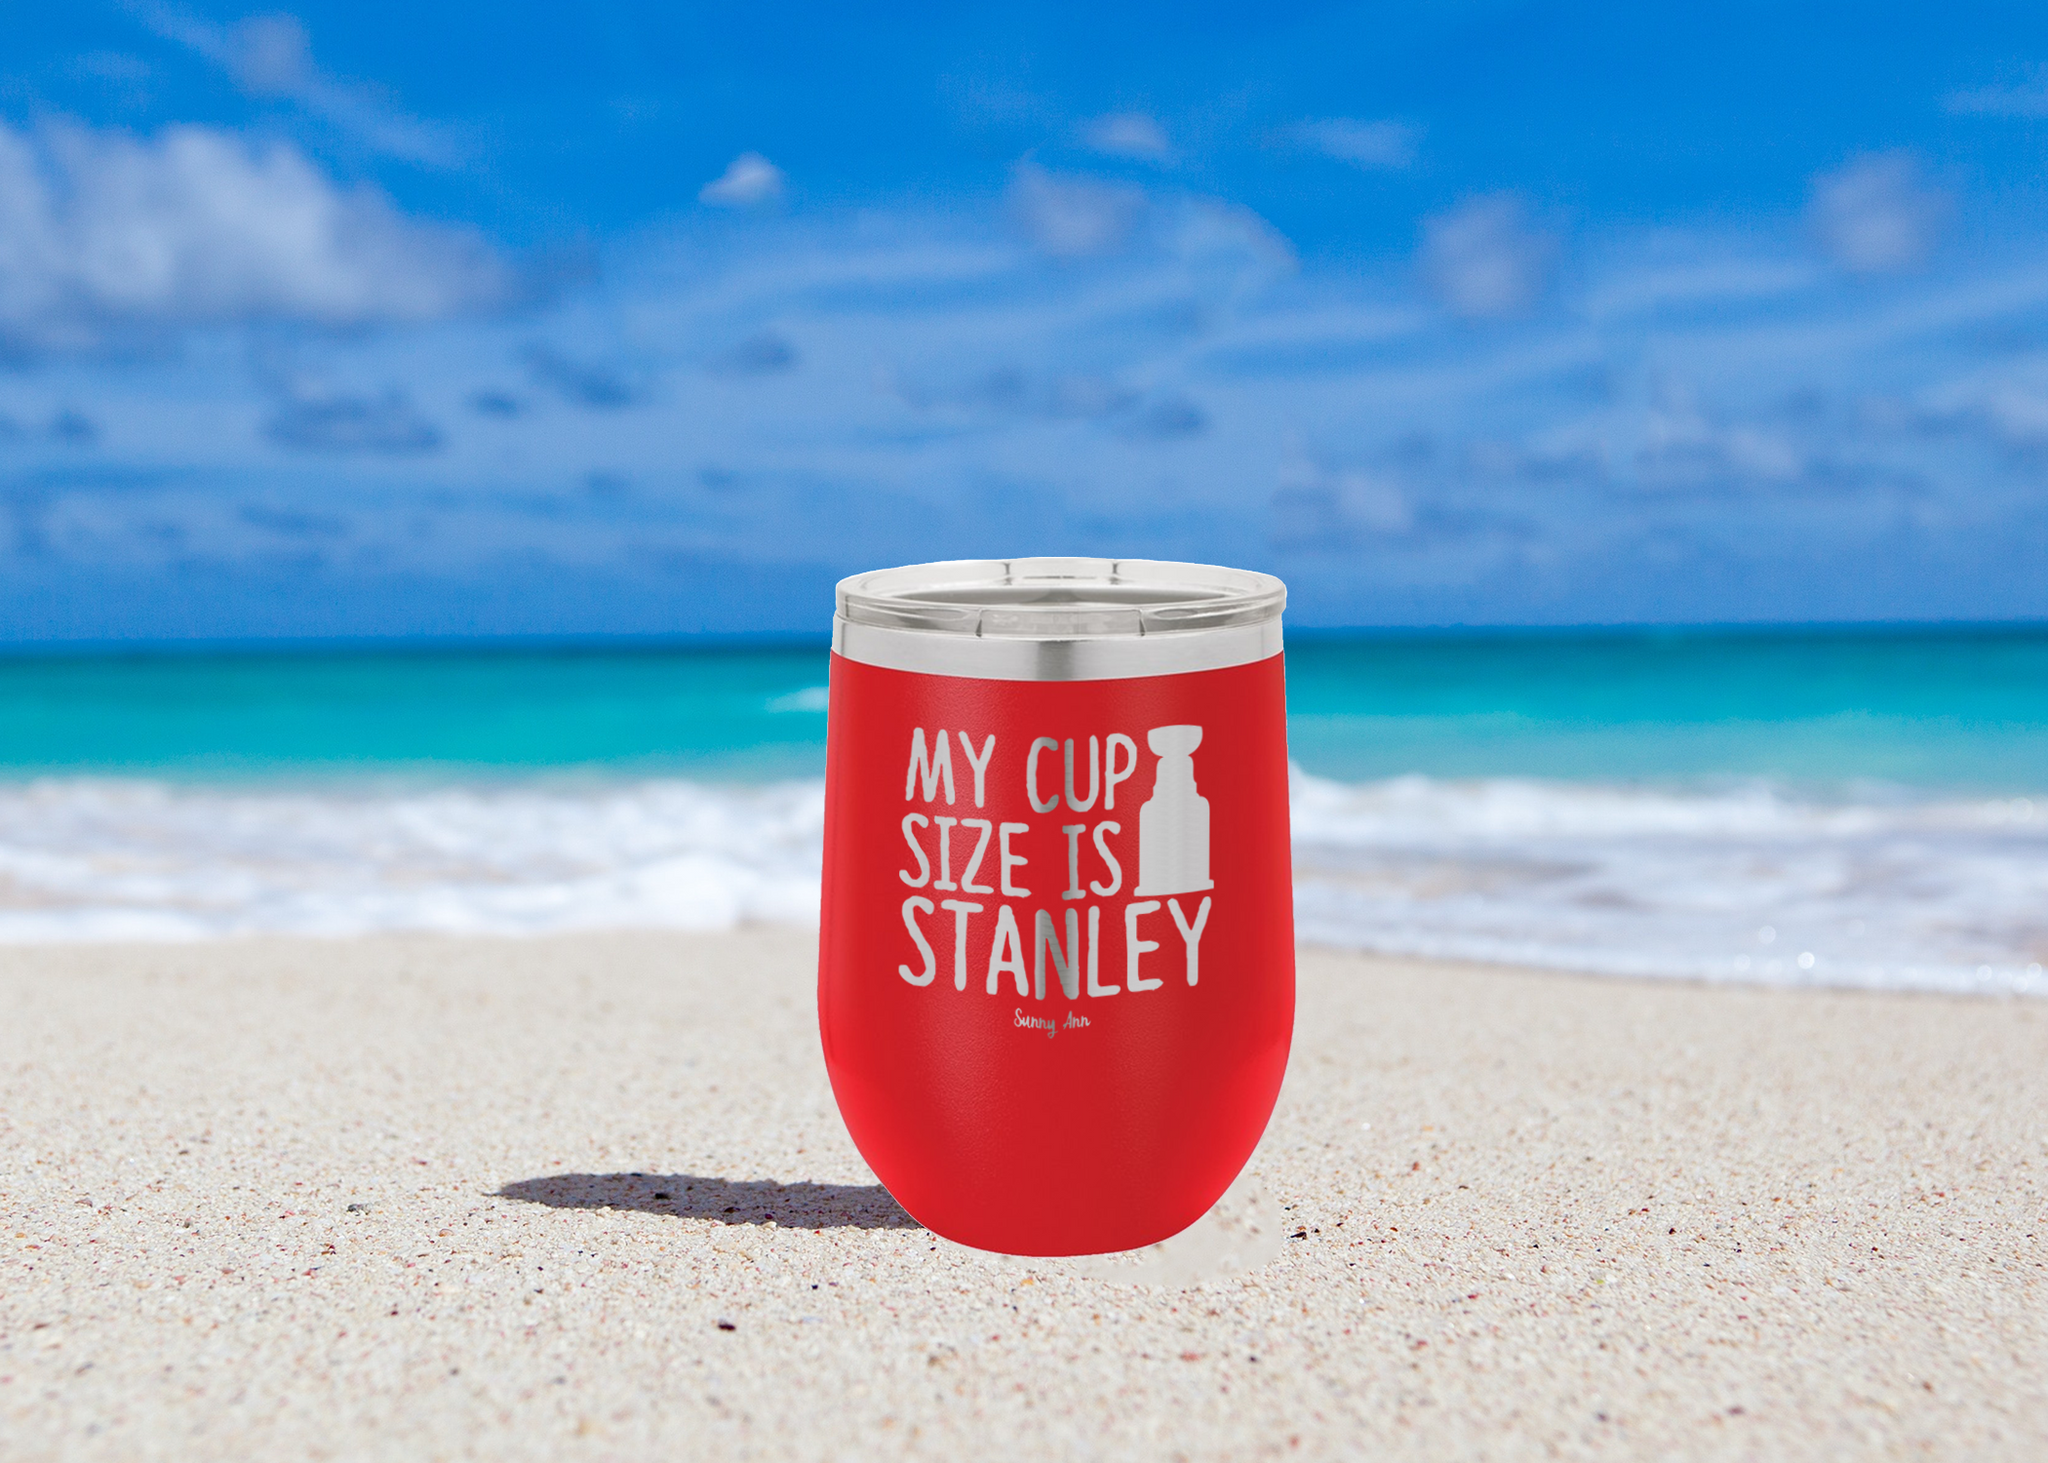 There's a Glass Version of the Stanley Cup – LifeSavvy